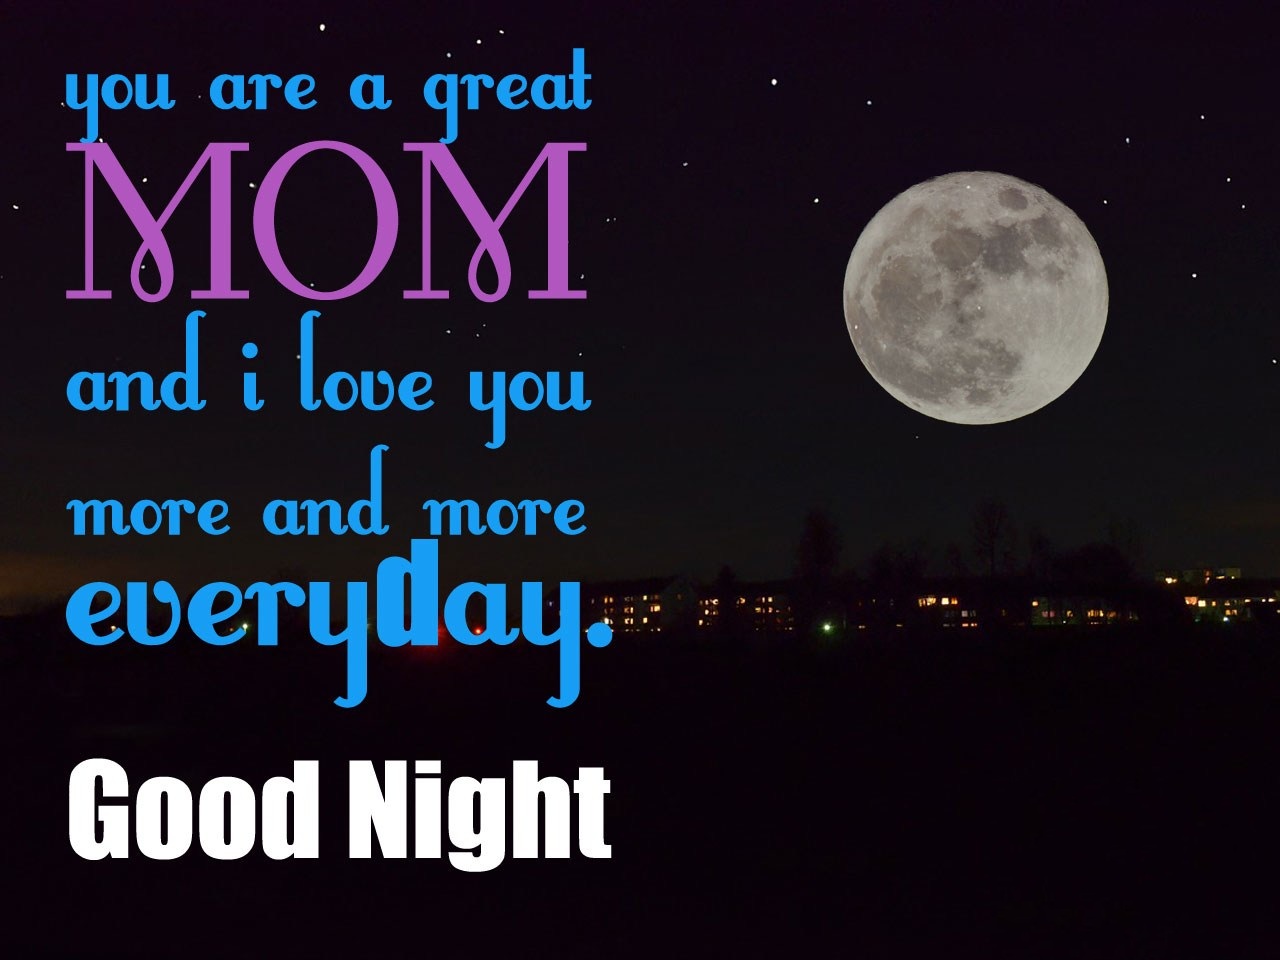 Good night wishes for mom: Good night images and quotes for mom.